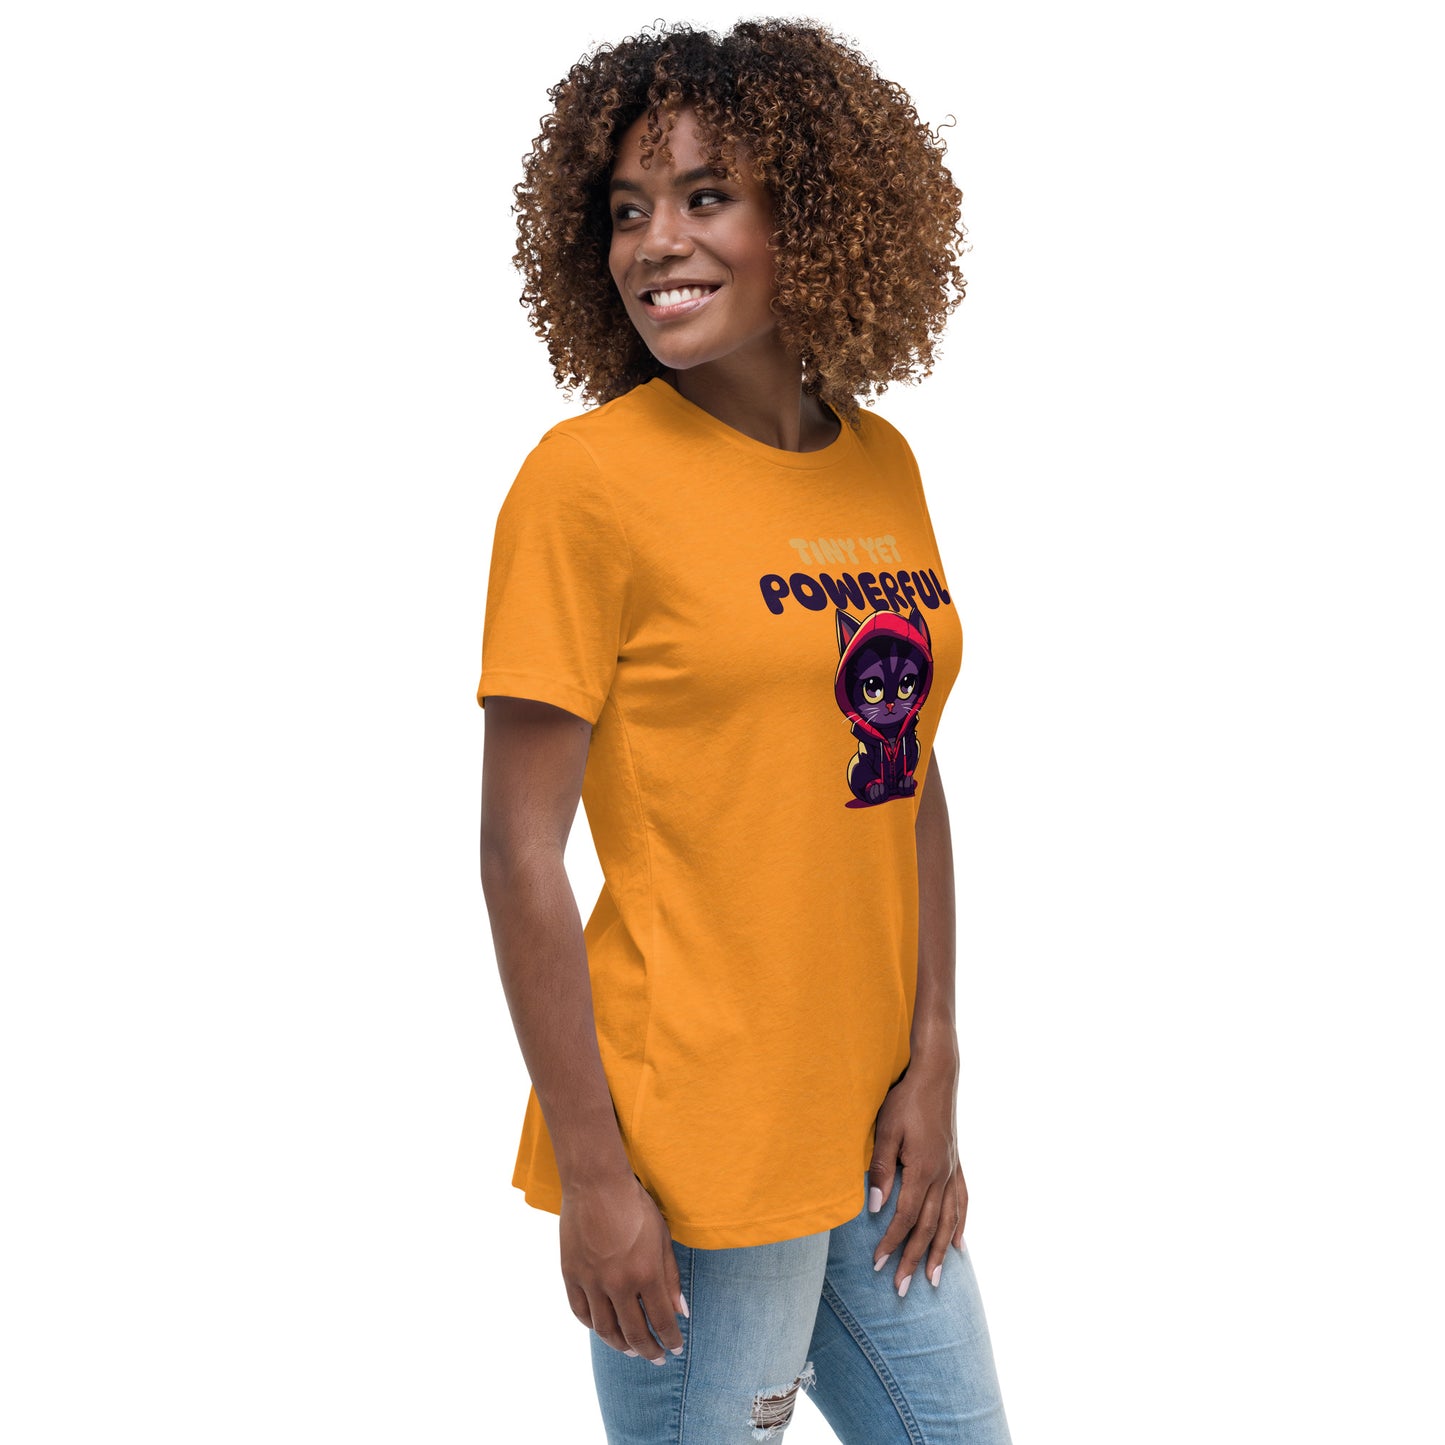 Tiny Yet powerful Women's Relaxed T-Shirt